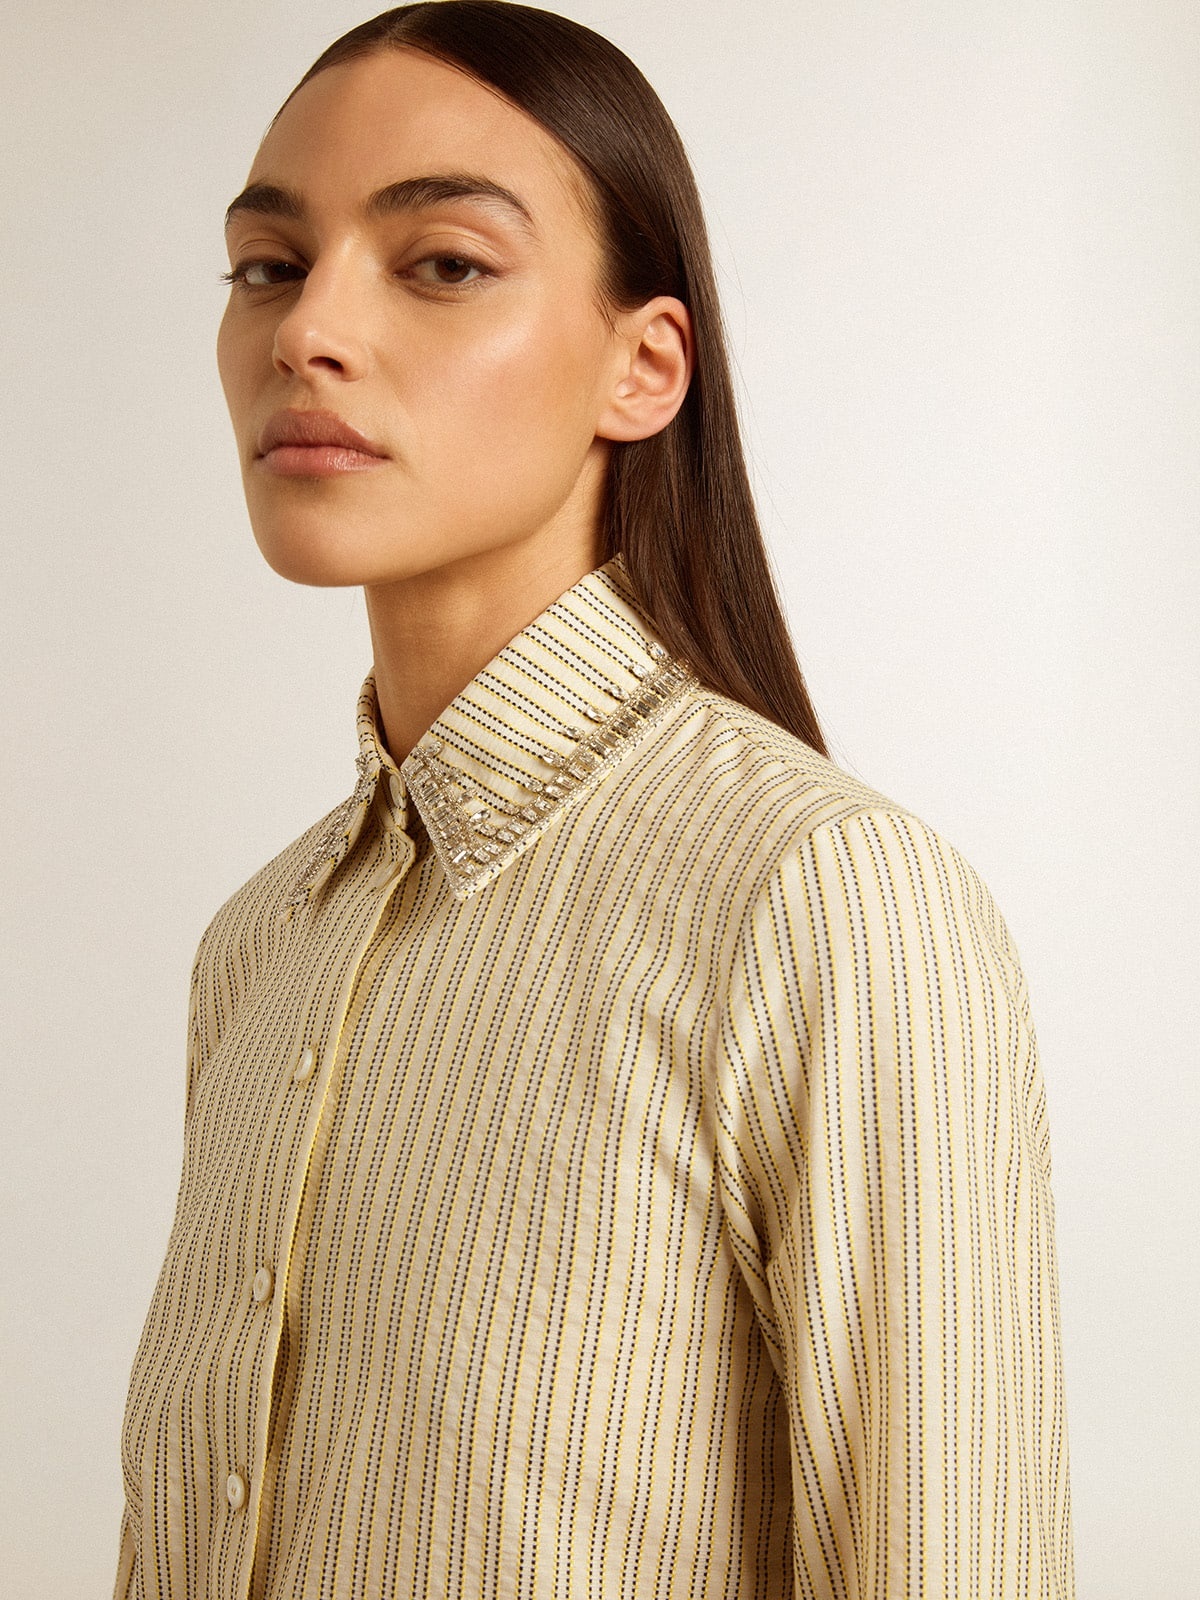 Ecru shirt with stripes and embroidered crystals - 5